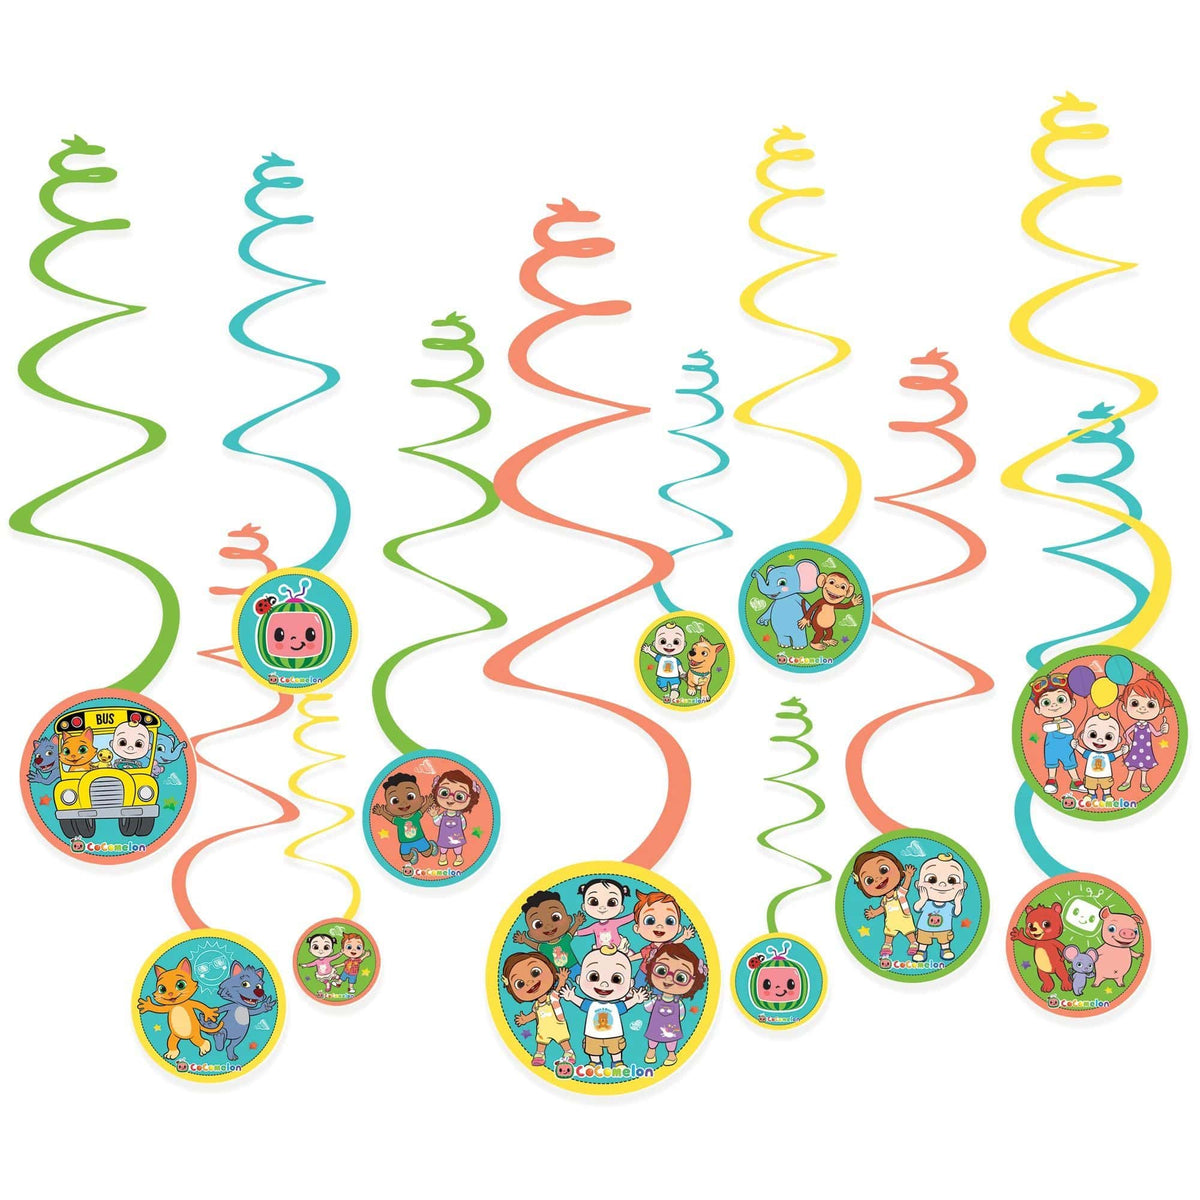  Encanto Spiral Hanging Decorations (Pack of 12) - Multicolor  Cardstock - Eye-catching & Festive Decor - Ideal for Birthdays, Parties, &  Home Celebrations : Home & Kitchen